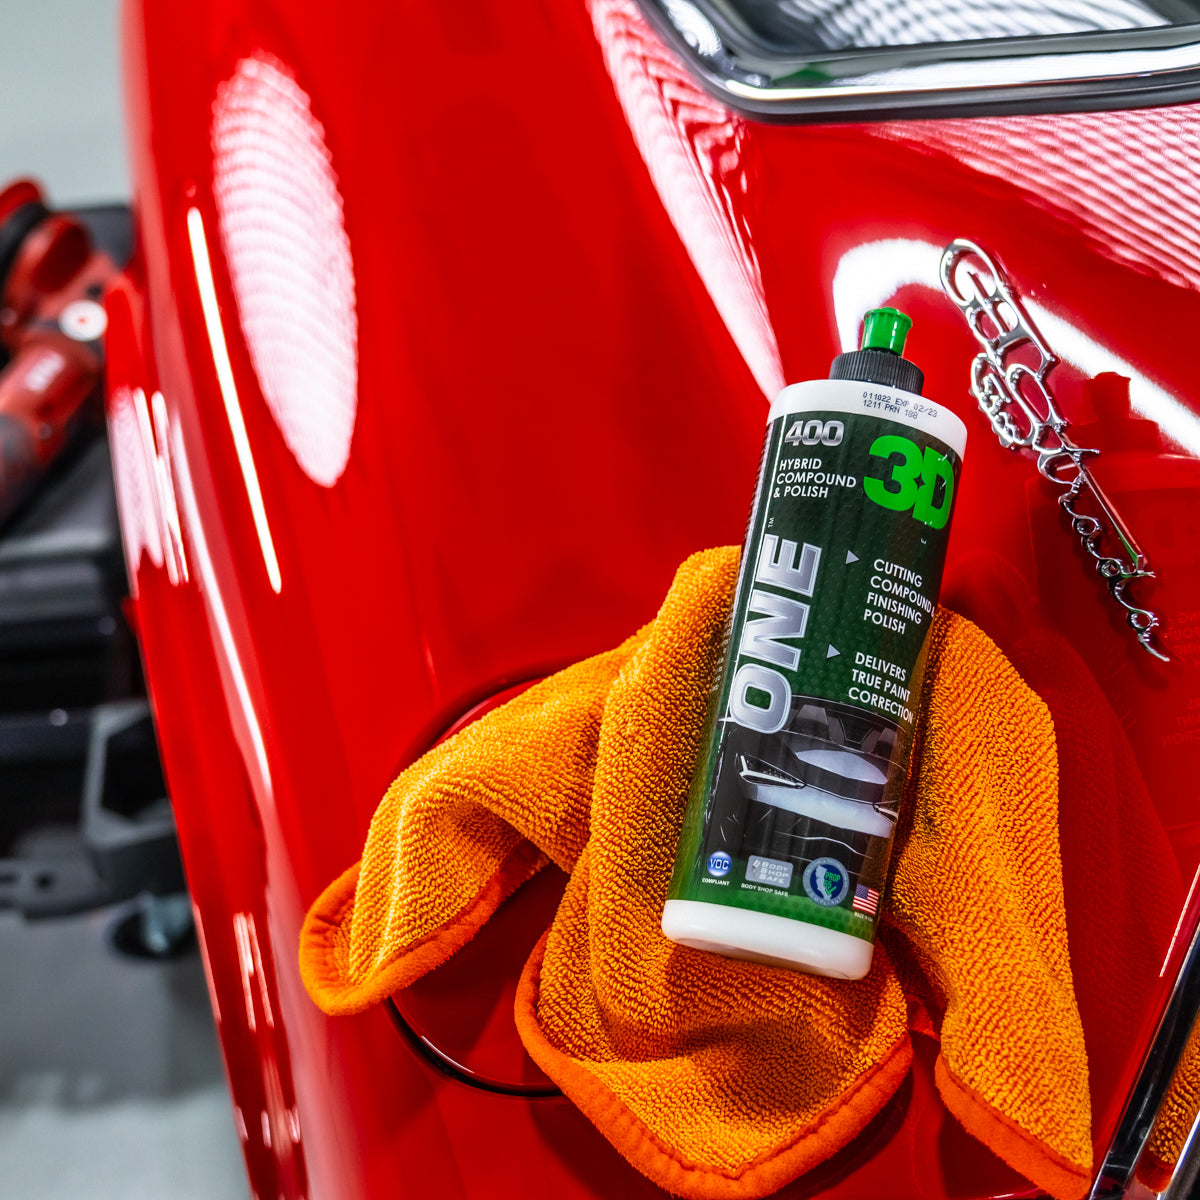 3D One is the best known 3D compound out there. Raving feedback from professionals and enthusiast makes this one step compound a great solution for removing lighter scratches and give the car a nice gloss. 3D Ireland